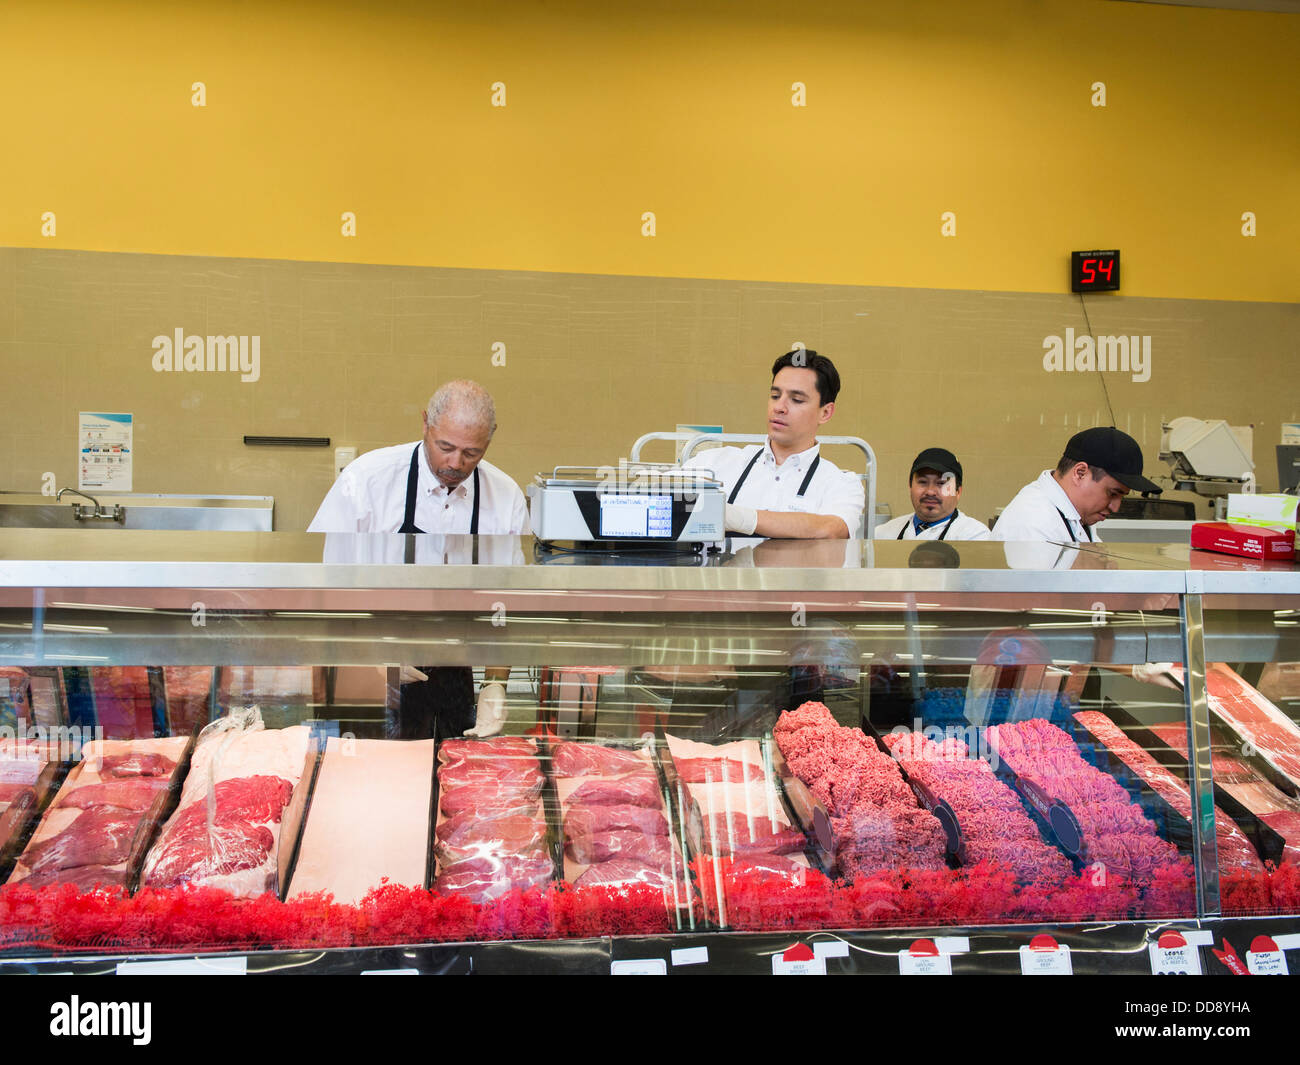 Butchers at meat counter of grocery store Stock Photo